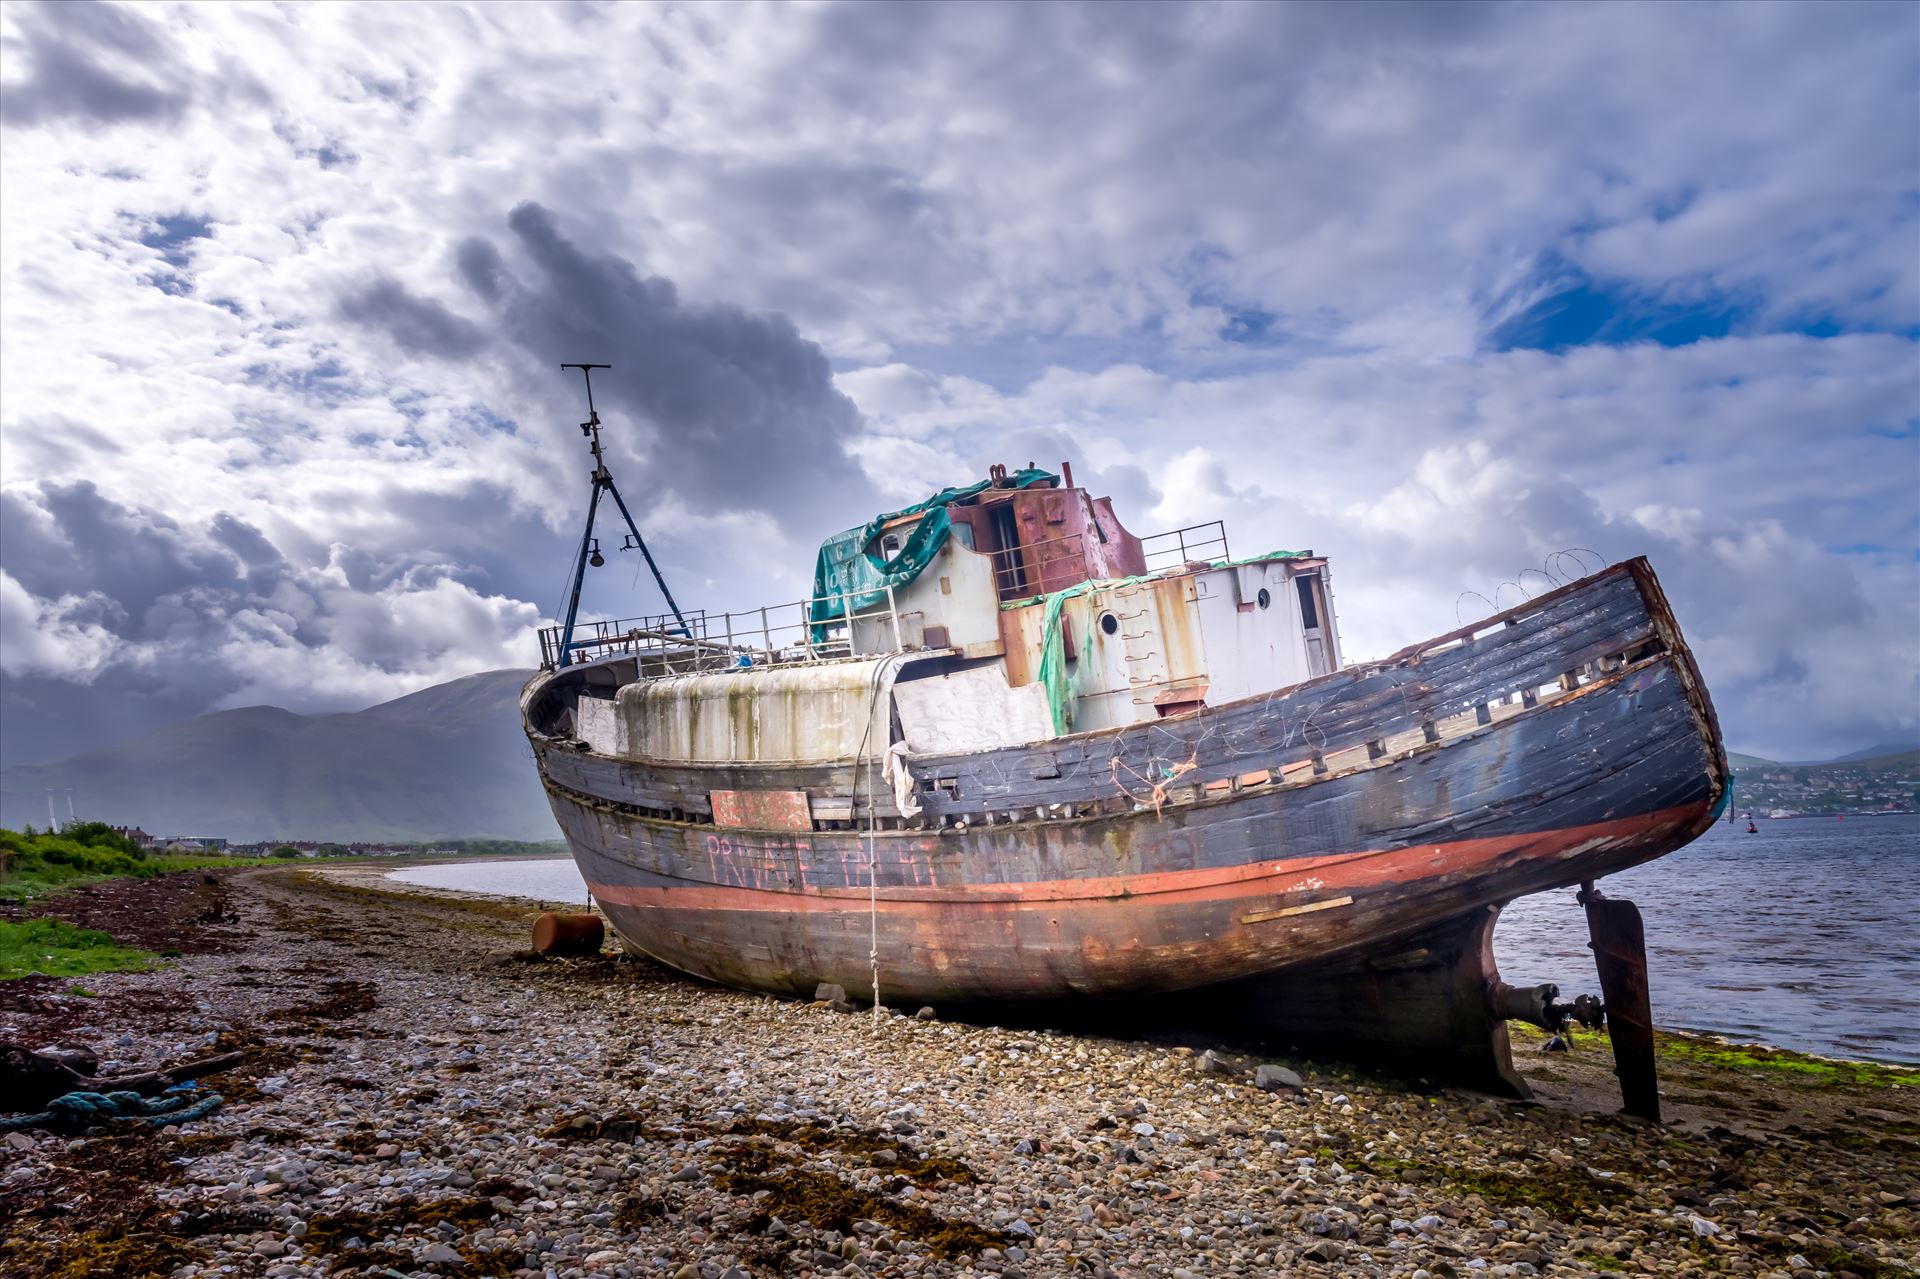 The Corpach wreck - She has become known as, 